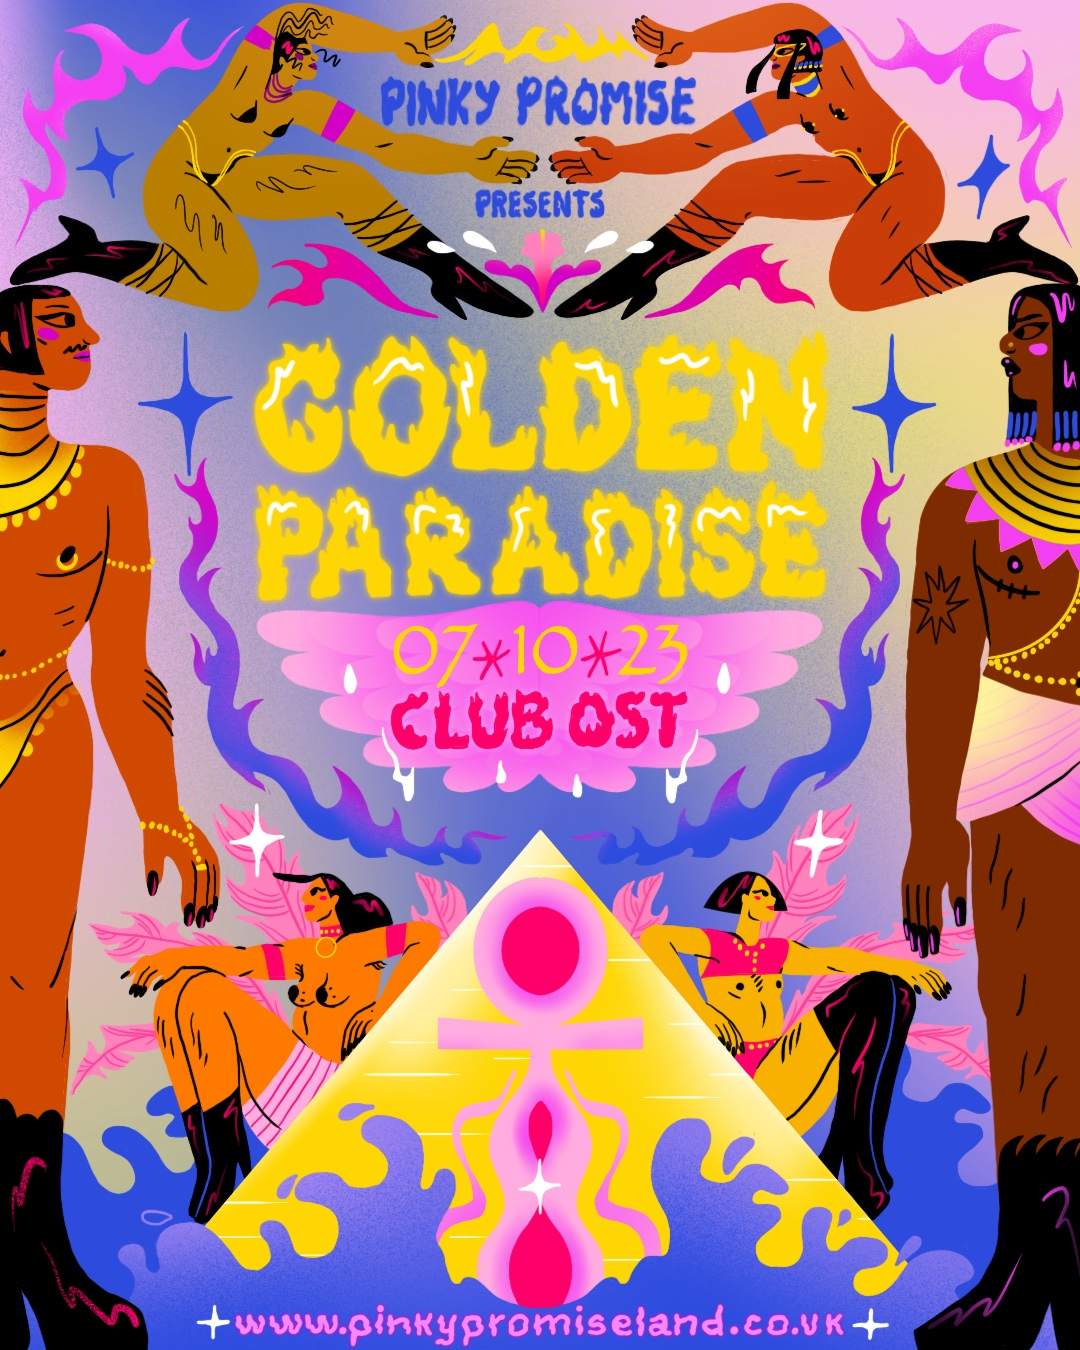 Pinky Promise: Golden Paradise - フライヤー表